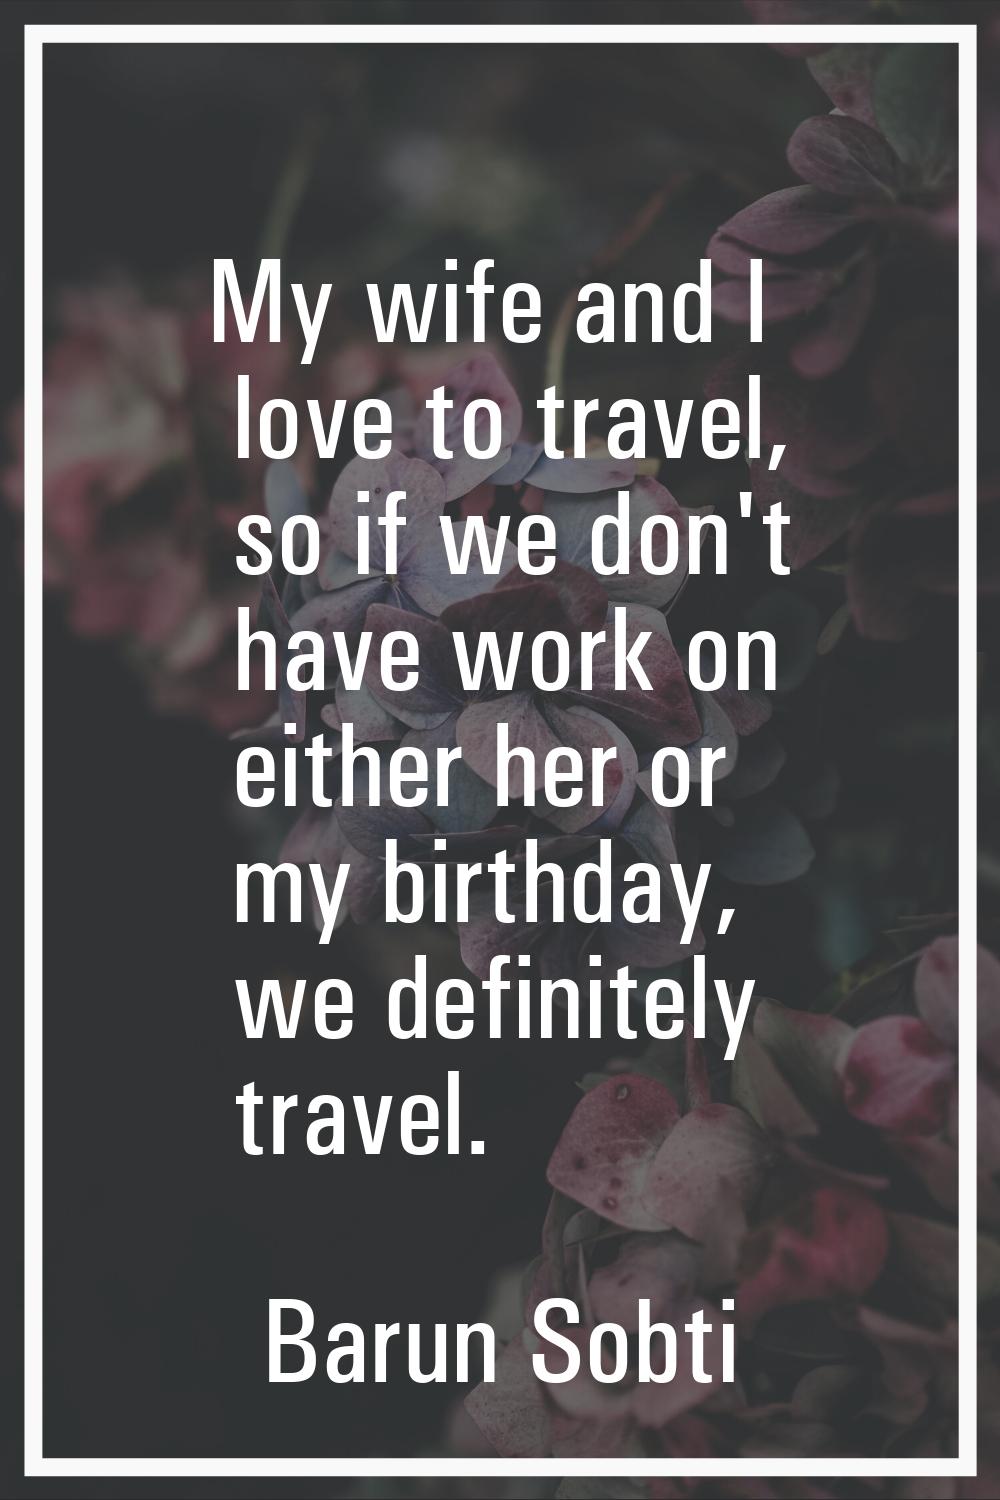 My wife and I love to travel, so if we don't have work on either her or my birthday, we definitely 